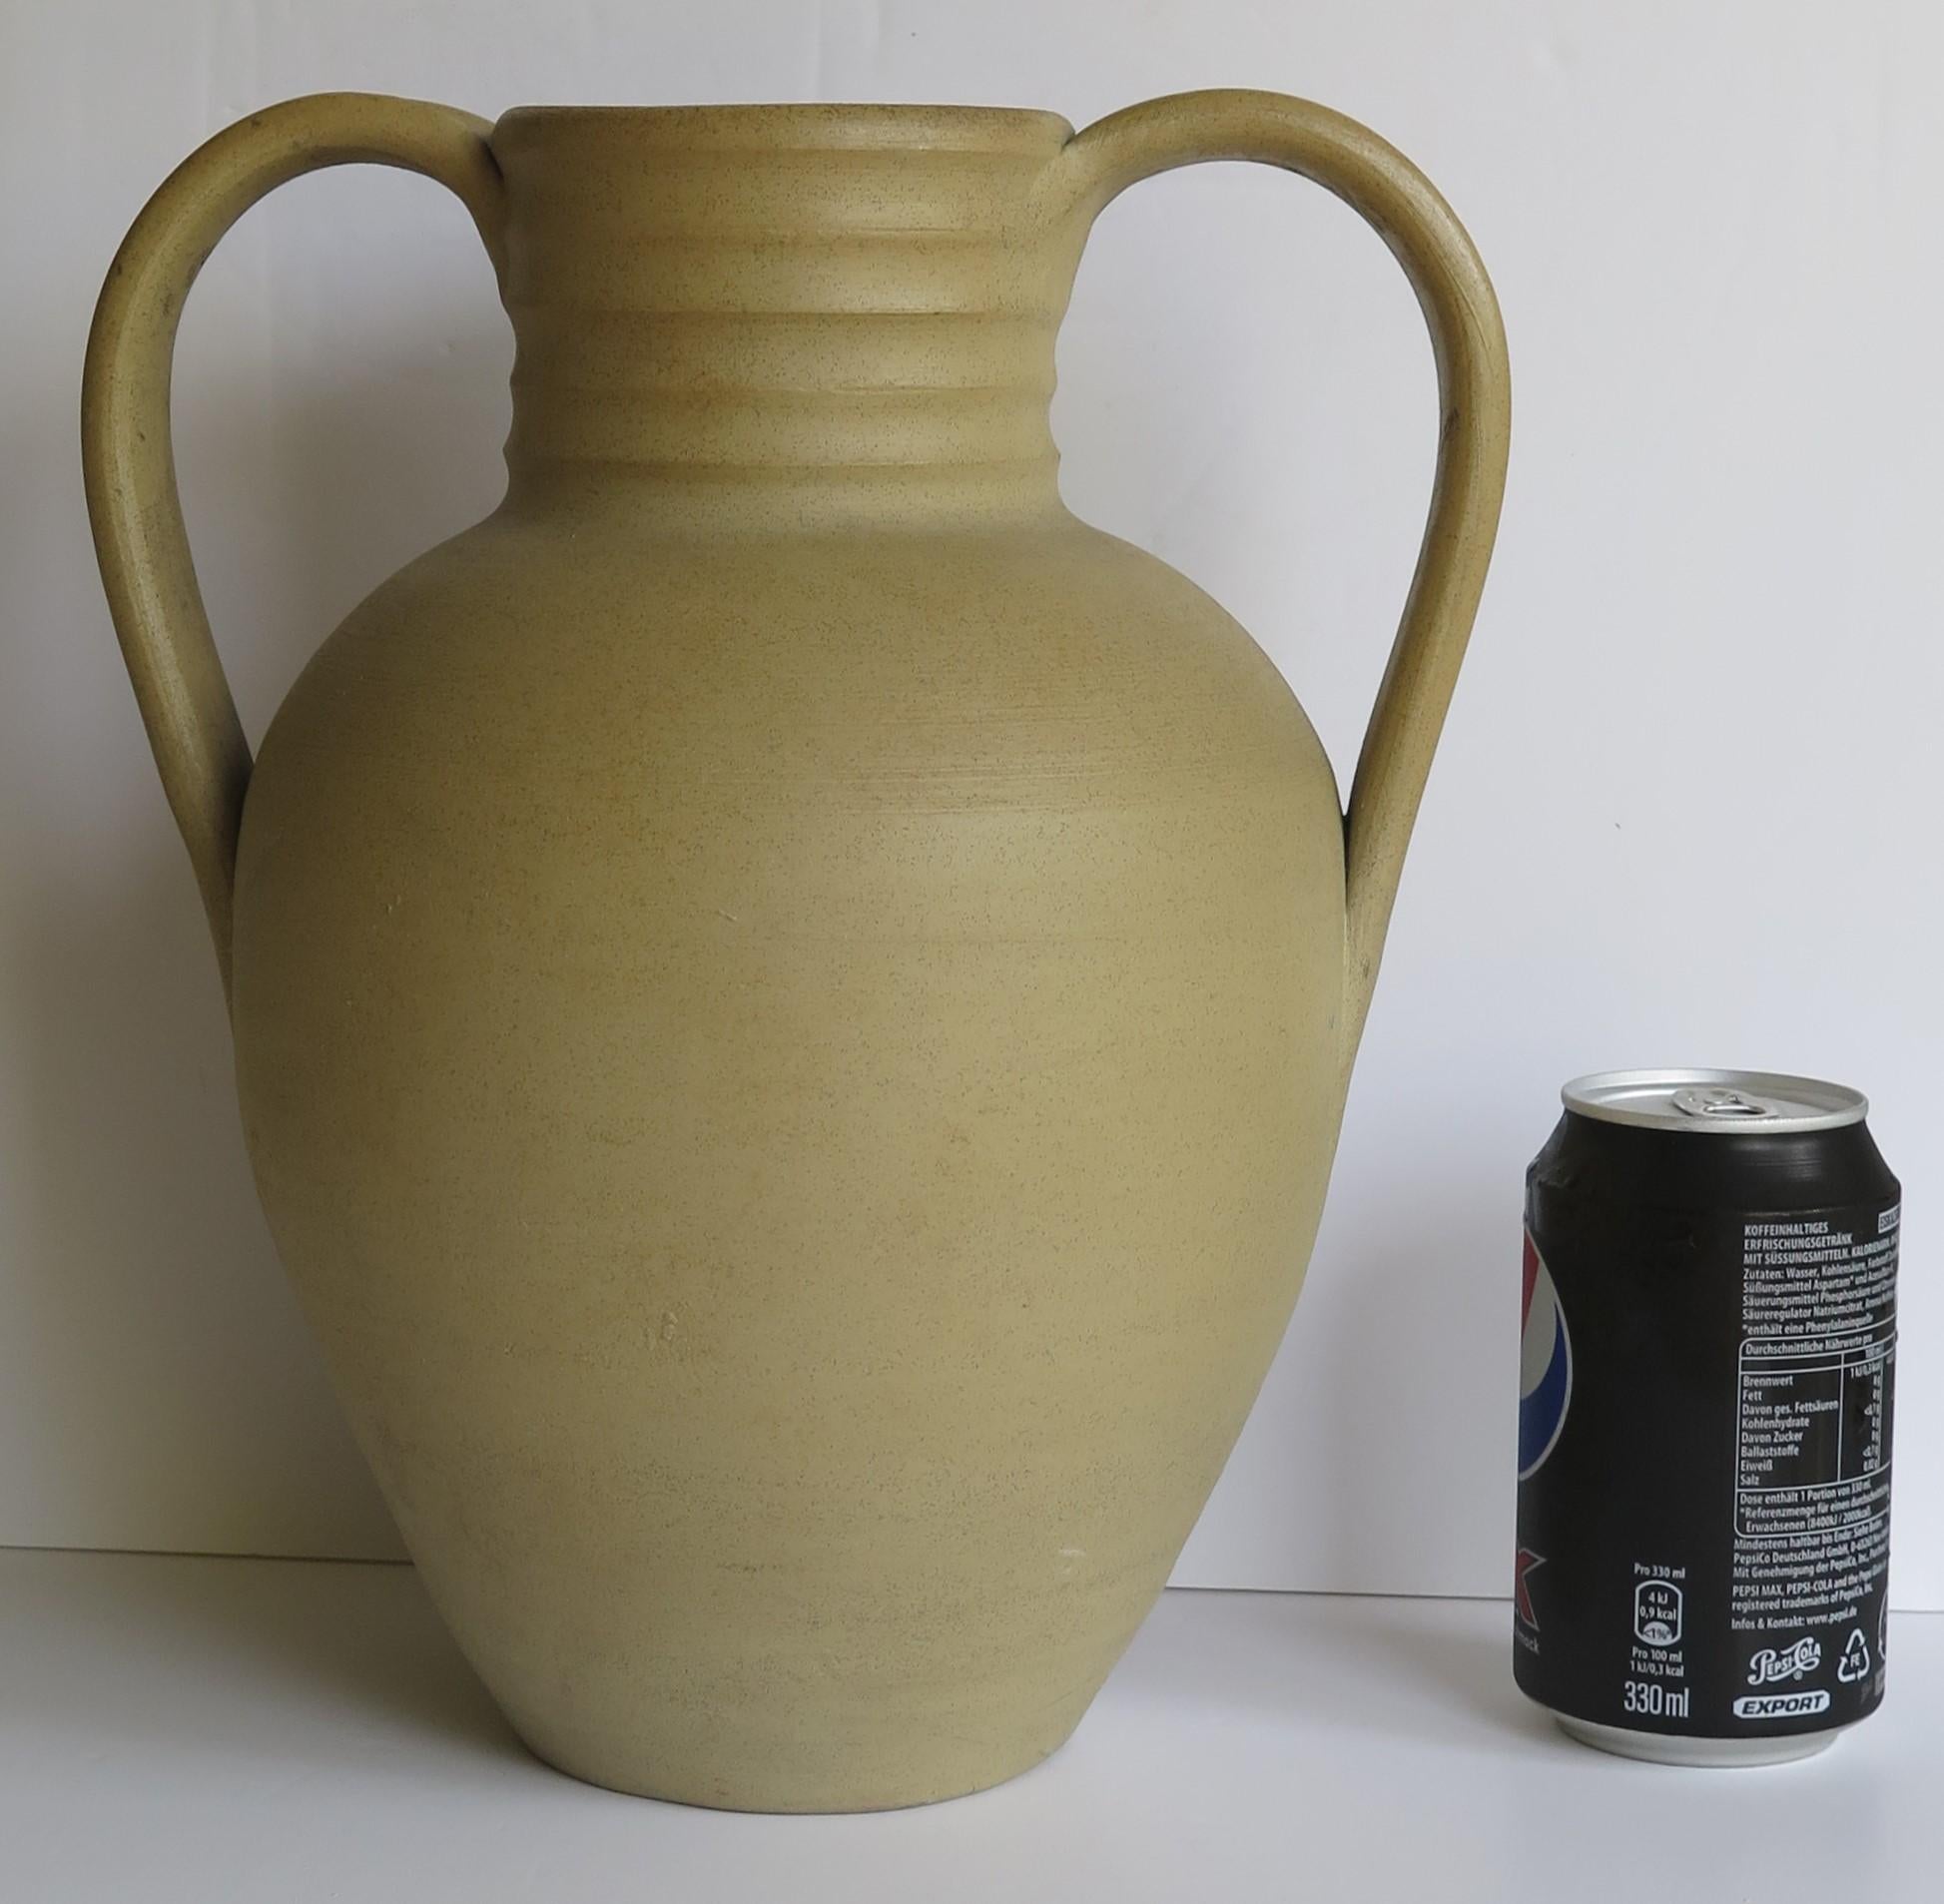 Large Stoneware Vase or Urn by Moira Pottery Hillstonia Hand Potted, circa 1935 For Sale 11